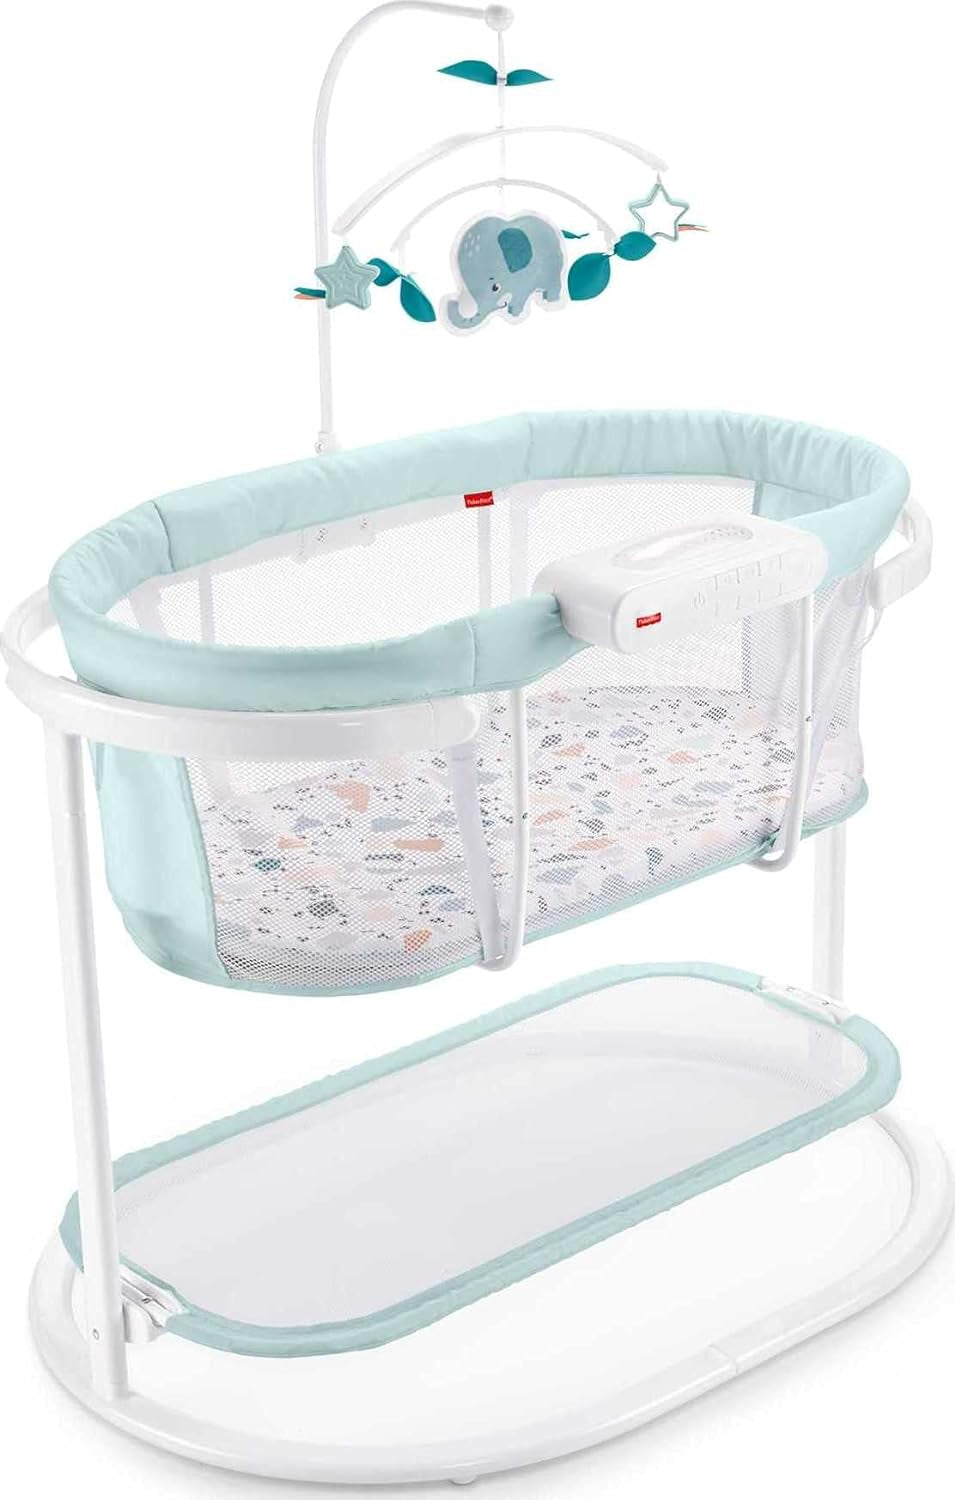 Fisher-Price Baby Bedside Sleeper Soothing Motions Bassinet with Lights Music Vibrations & Overhead Mobile, Pacific Pebble